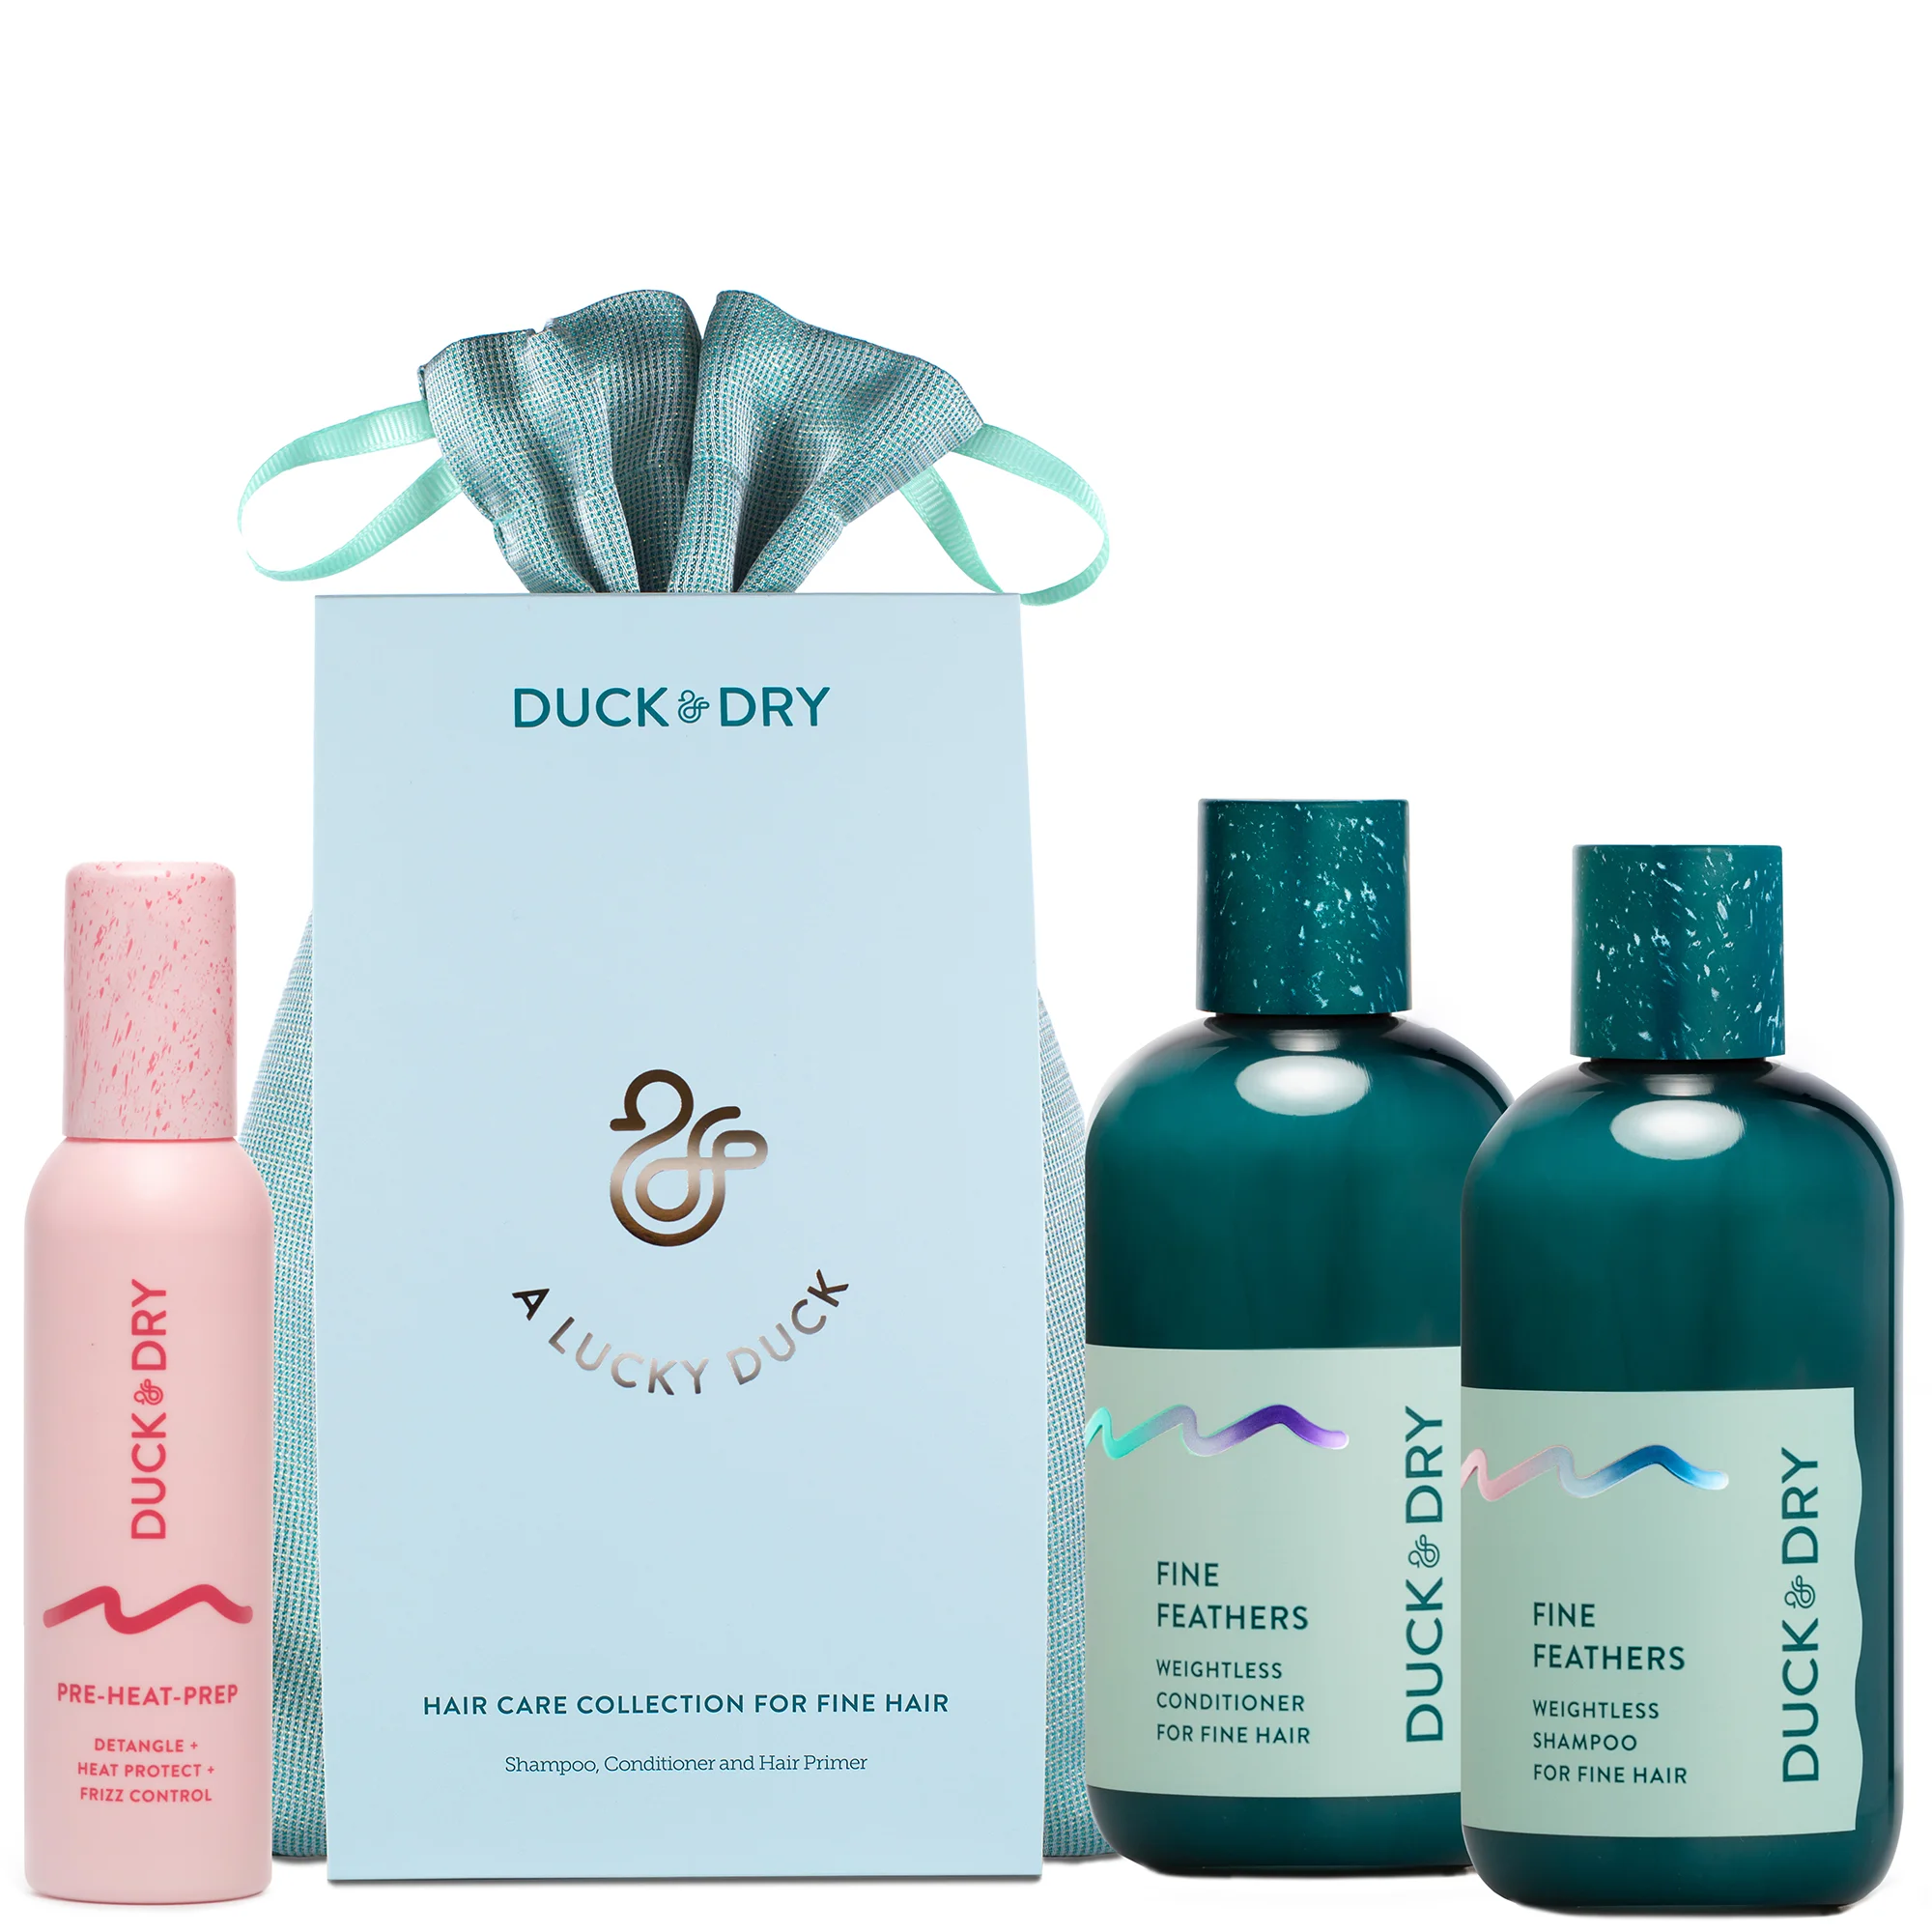 Duck & Dry Hair Care Collection for Fine Hair Image 1